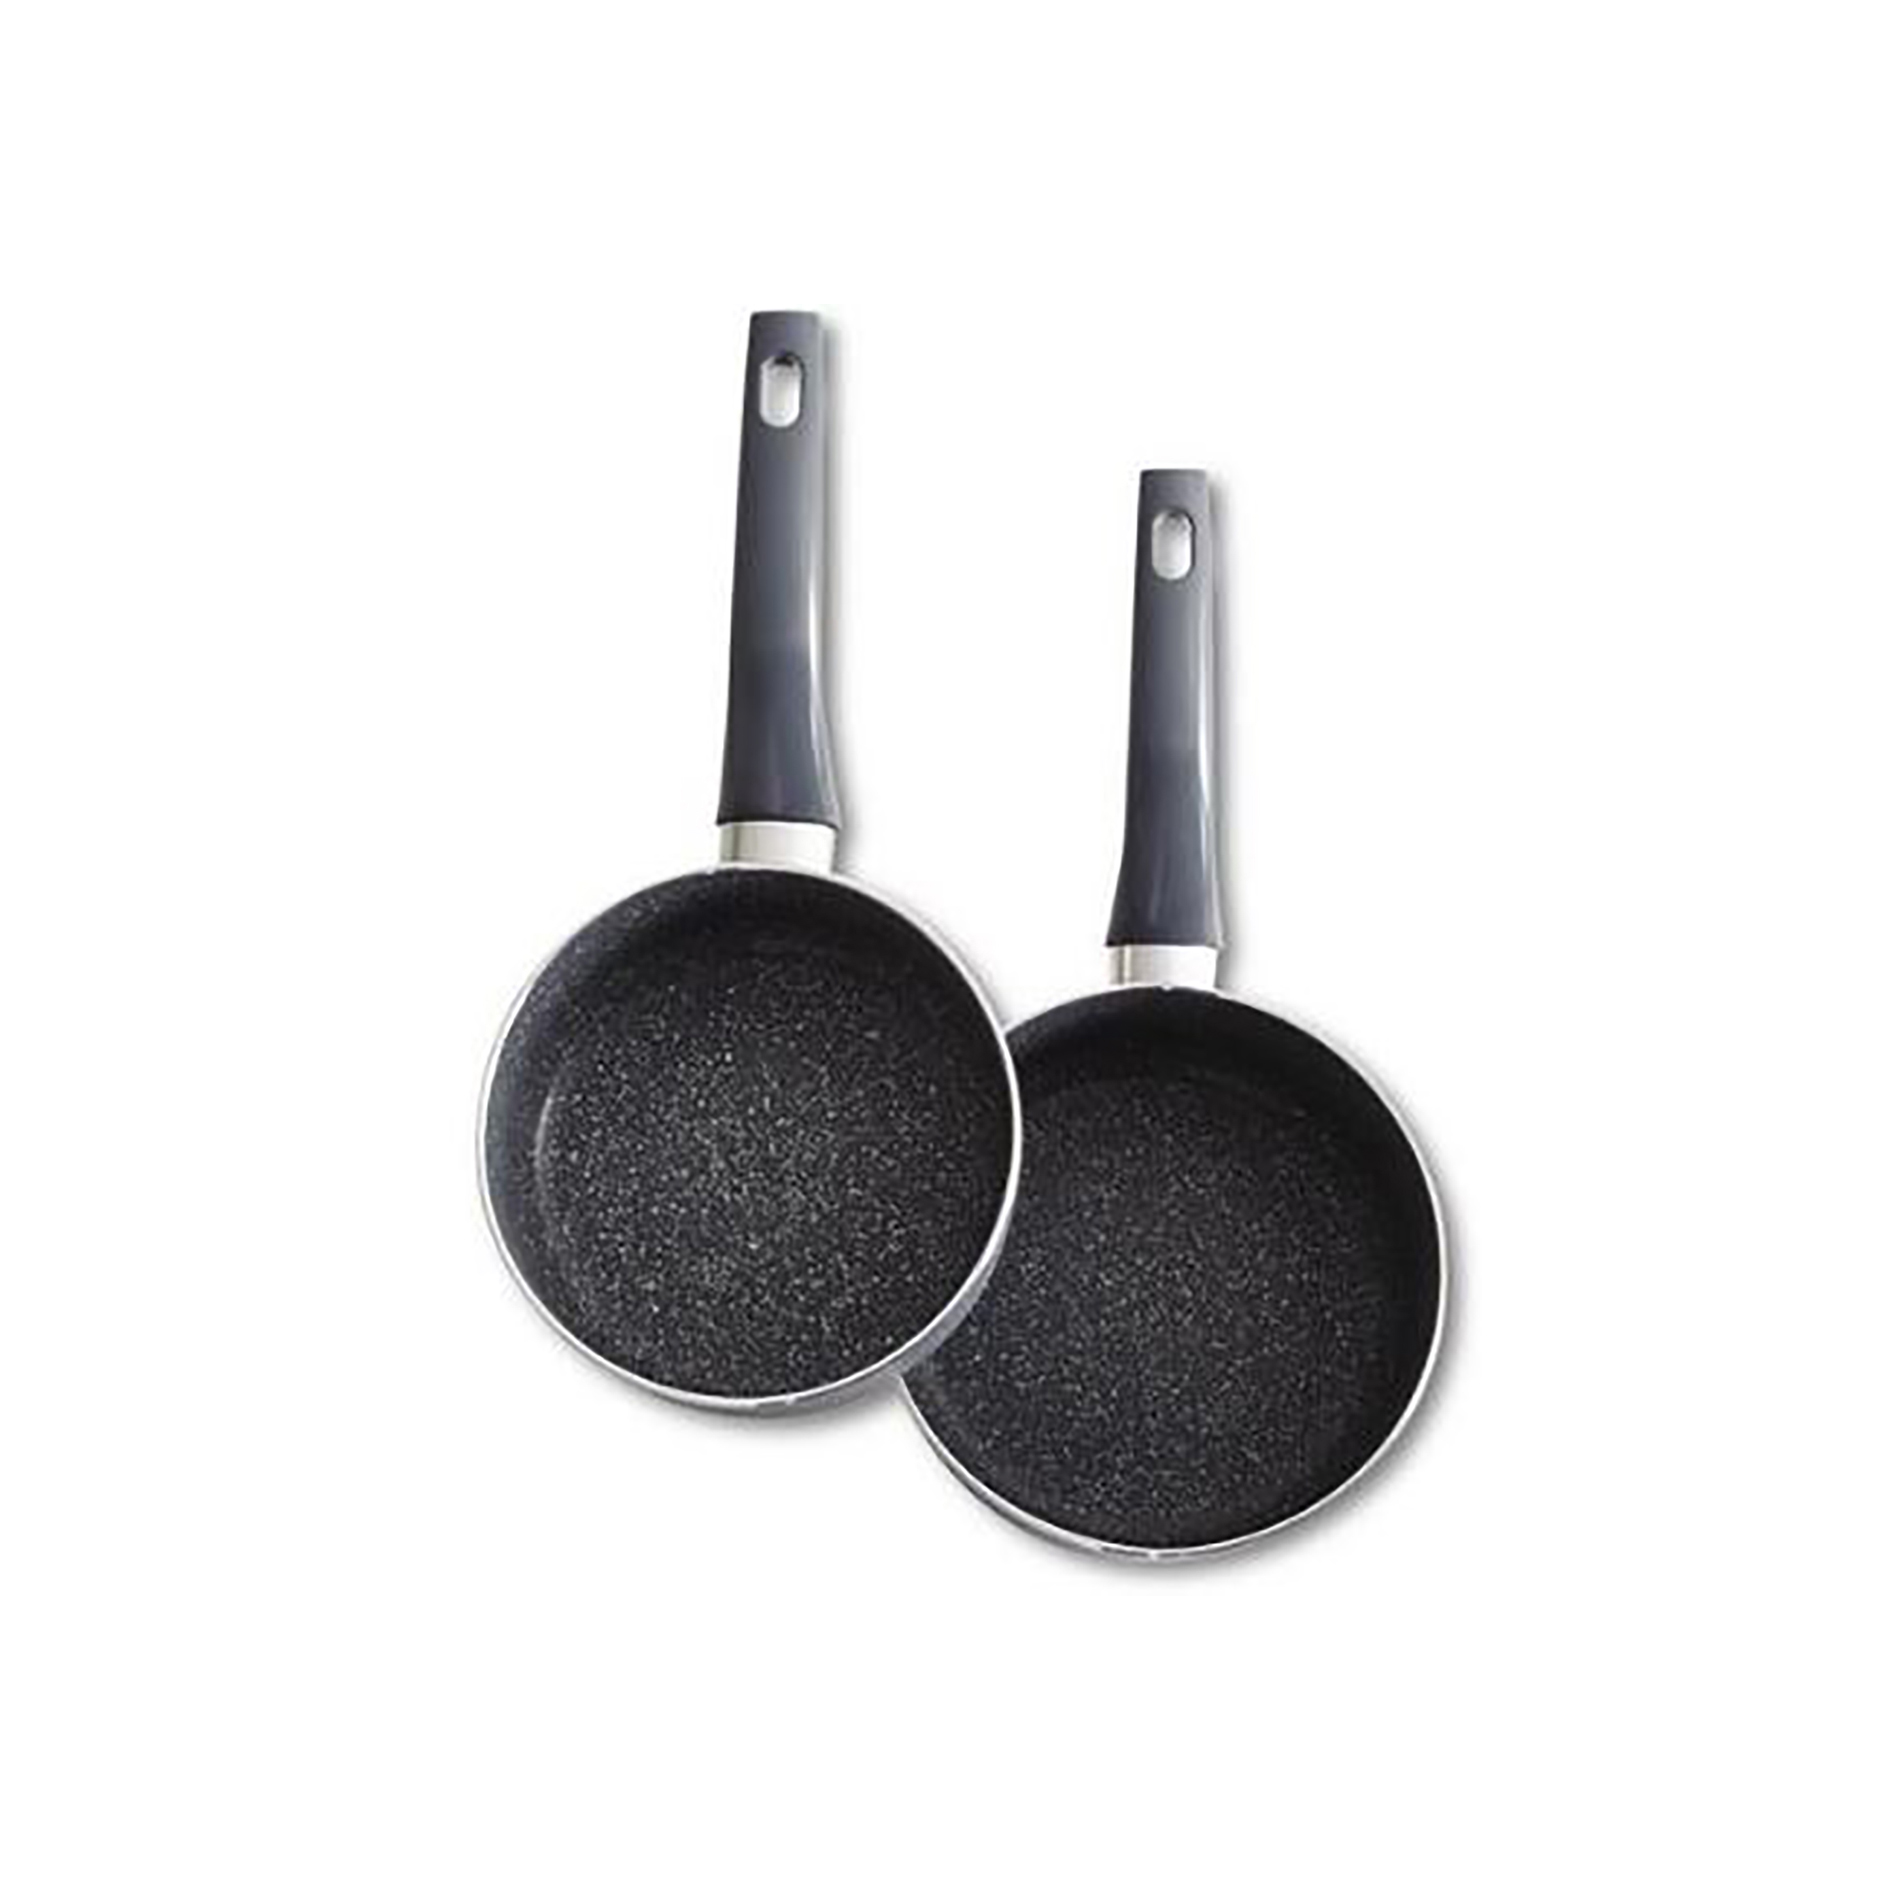 Essential Home 2 pc. Fry Pan Set - Speckled